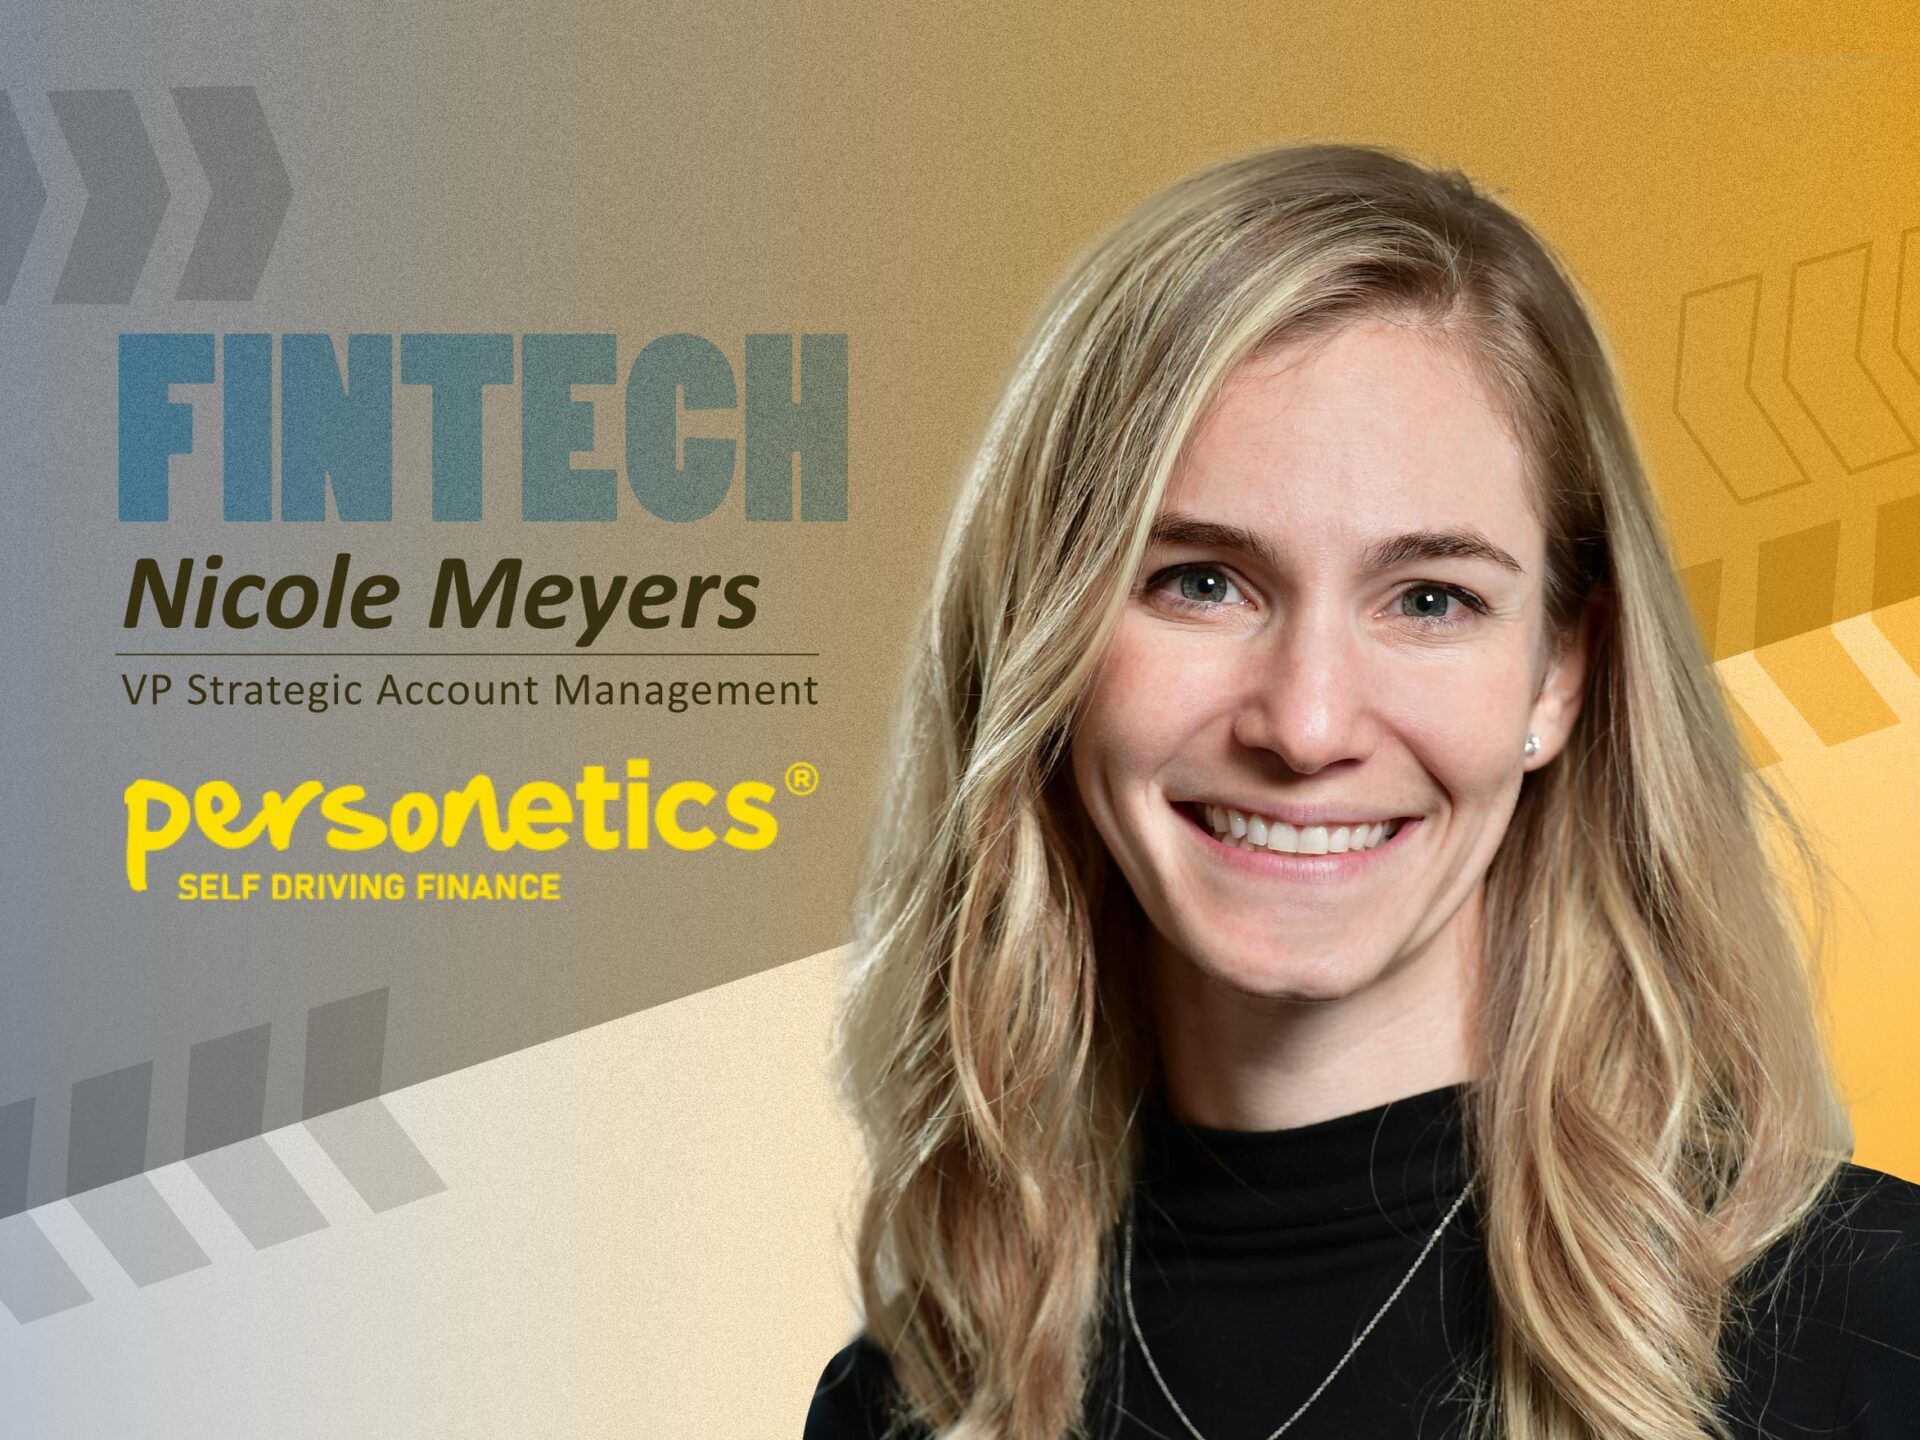 Global Fintech Interview with Nicole Meyers, VP Strategic Account Management at Personetics